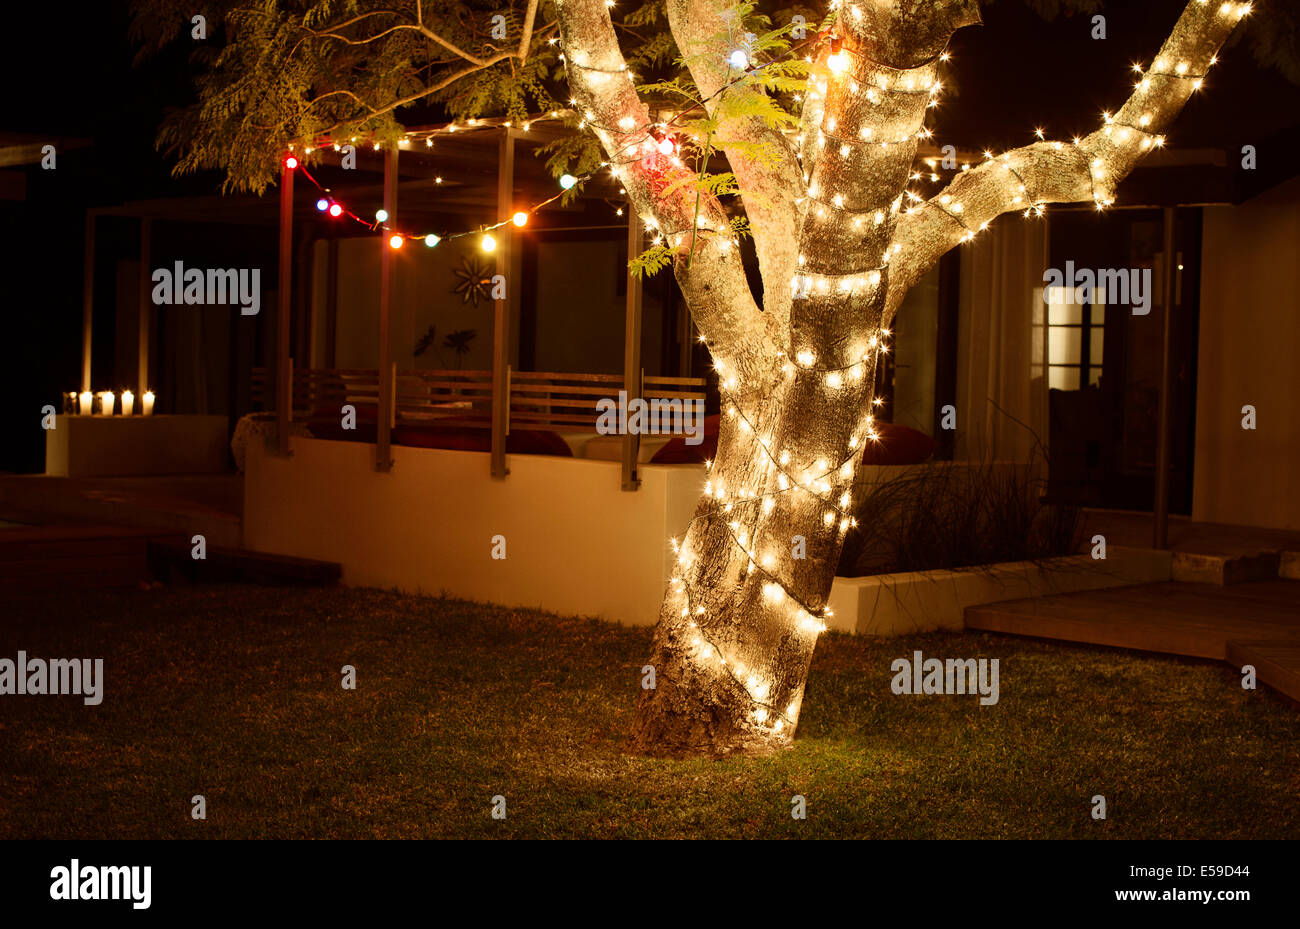 Tree lit up at night in backyard Banque D'Images